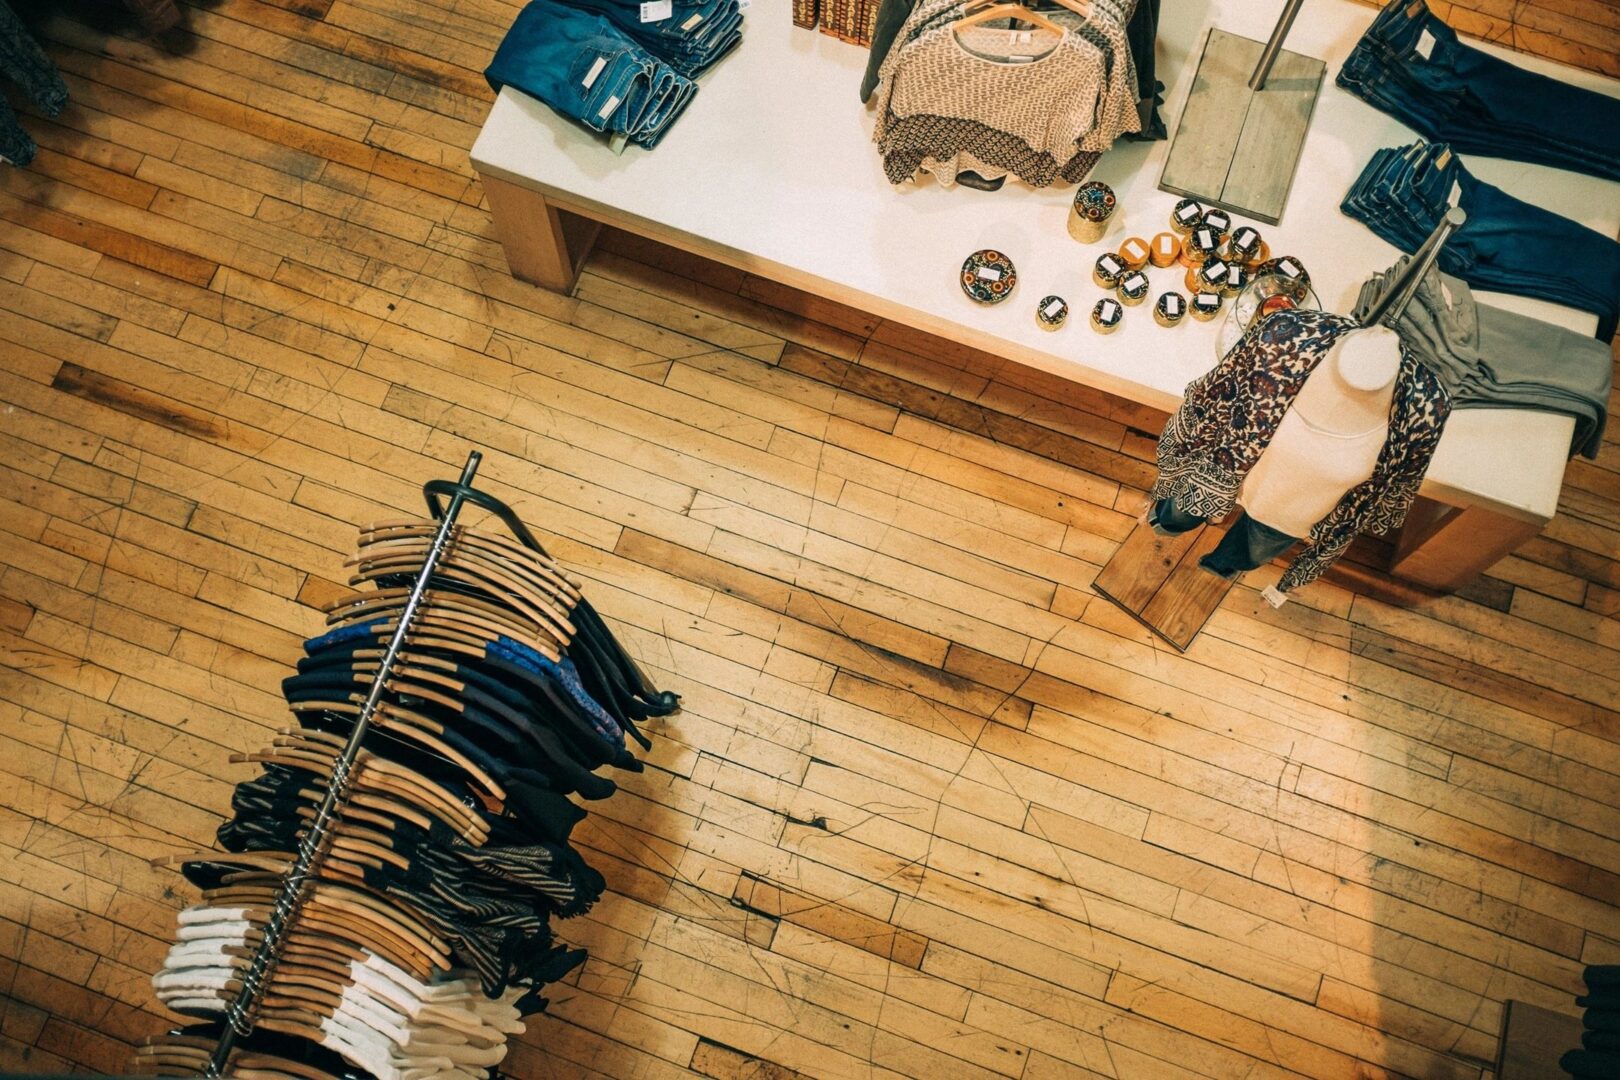 A person is shopping in a store with clothes on the rack.